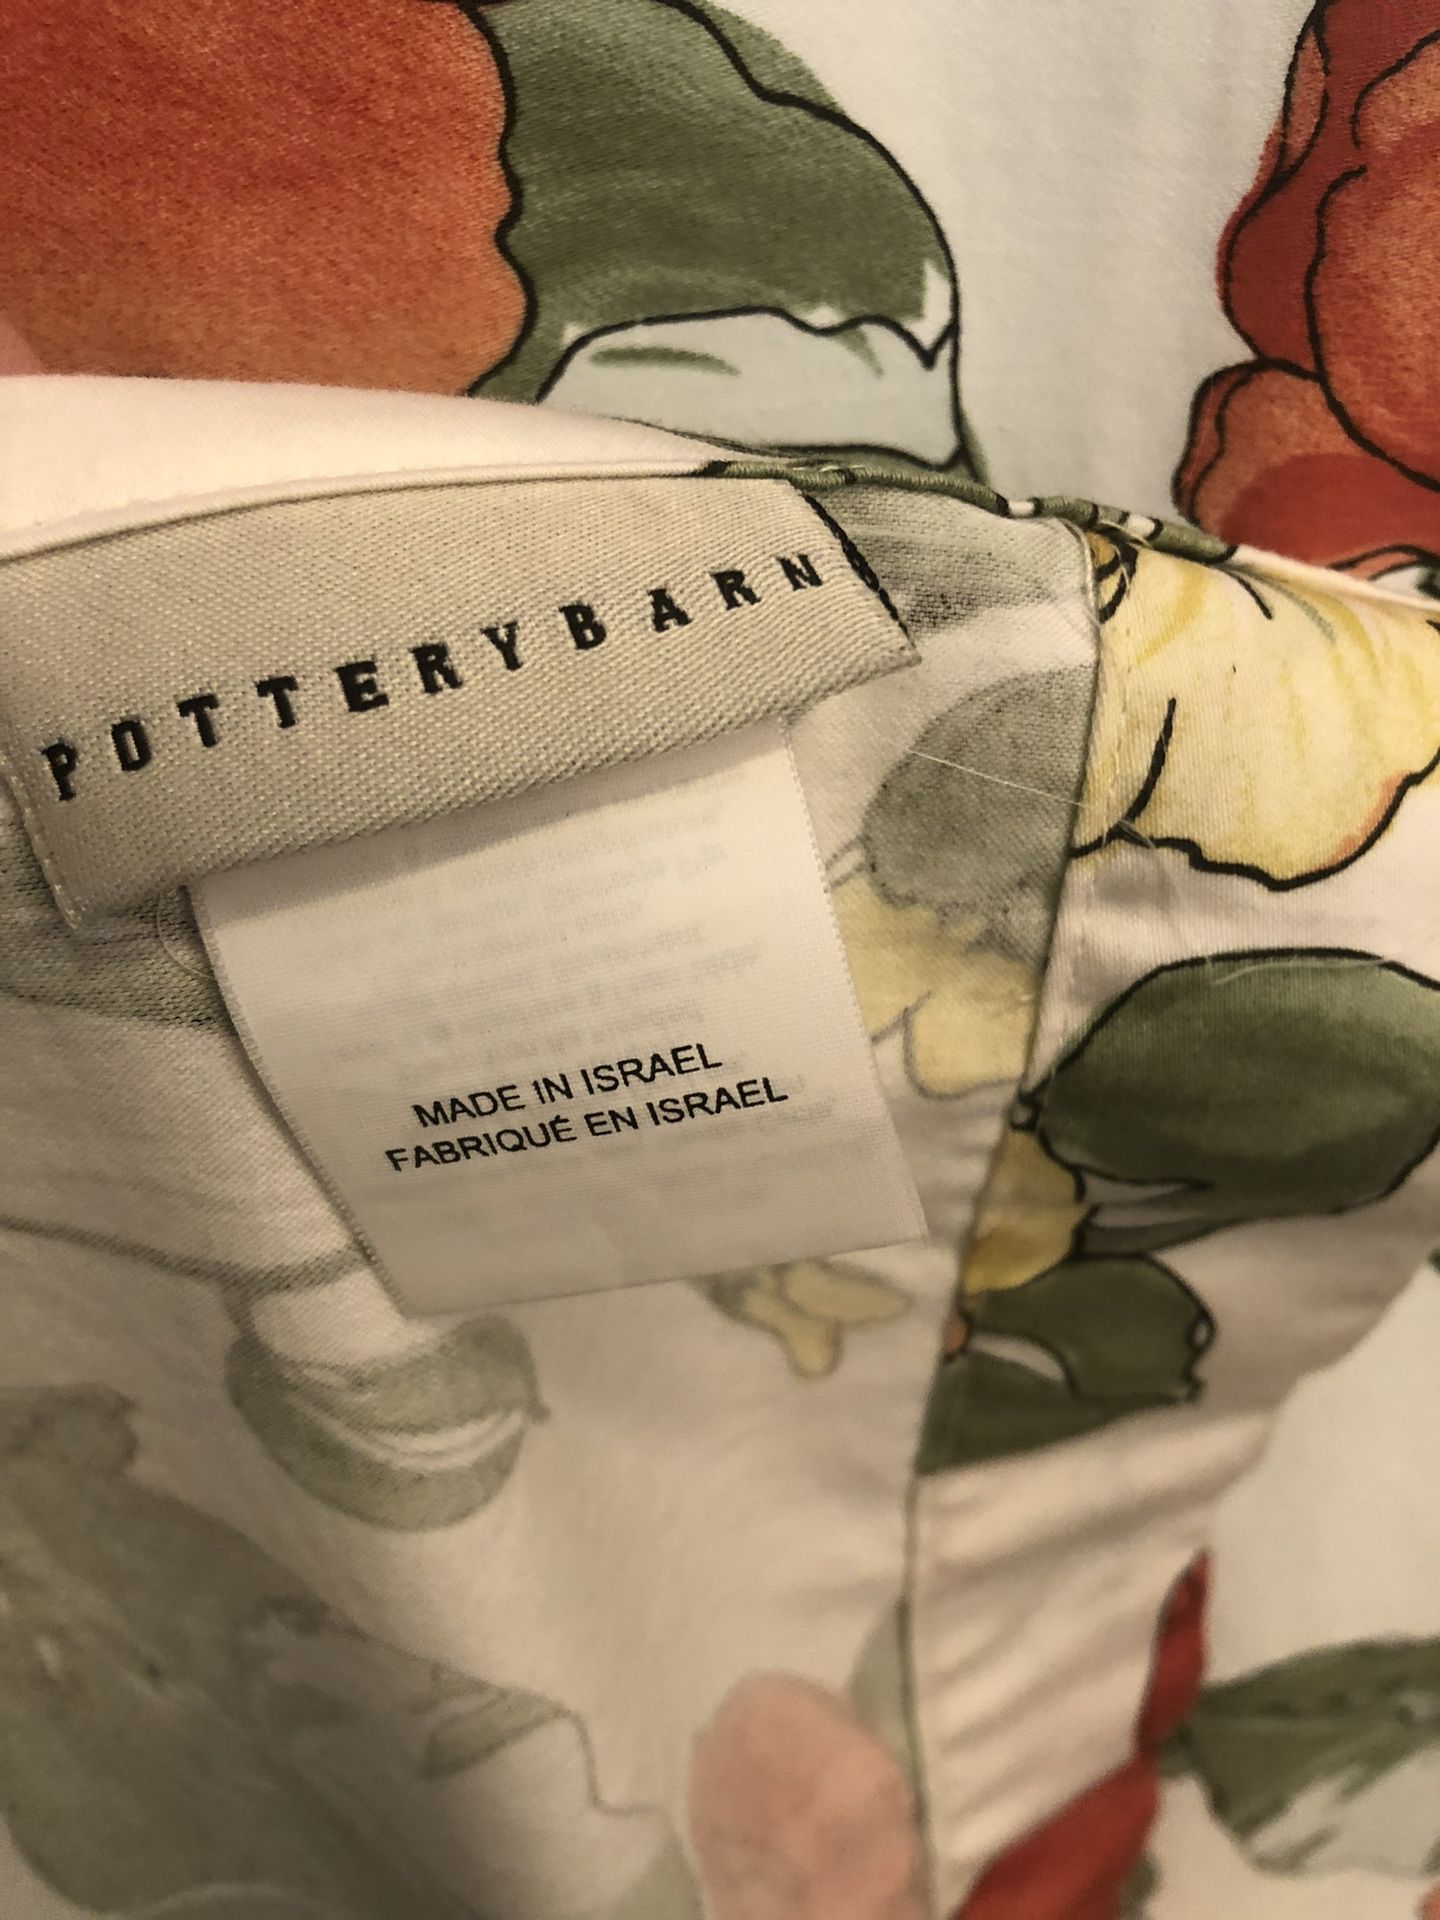 Brand new shower curtain Harry Potter for Sale in Ceres, CA - OfferUp